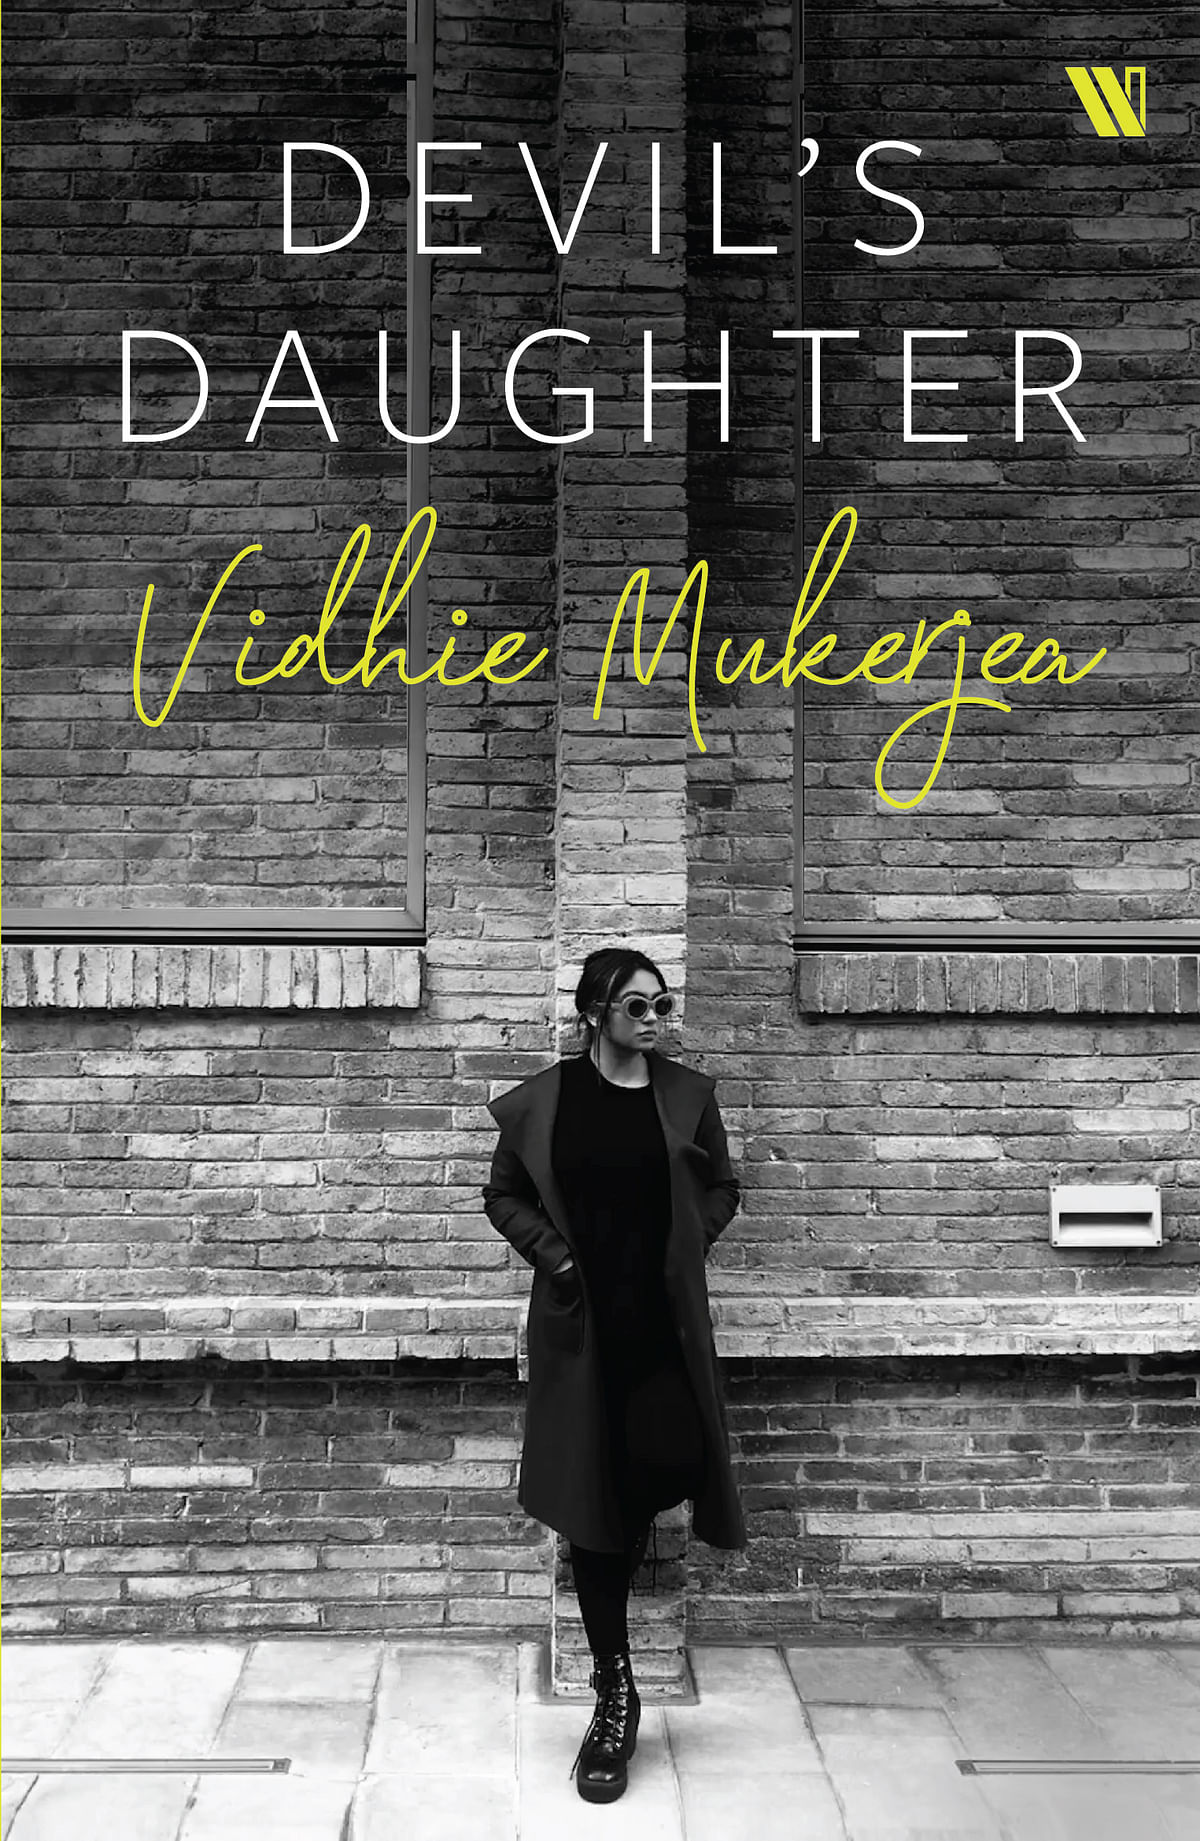 Vidhie Mukerjea, daughter of Indrani Mukerjea, talks about life after her book release, relationship with parents.  